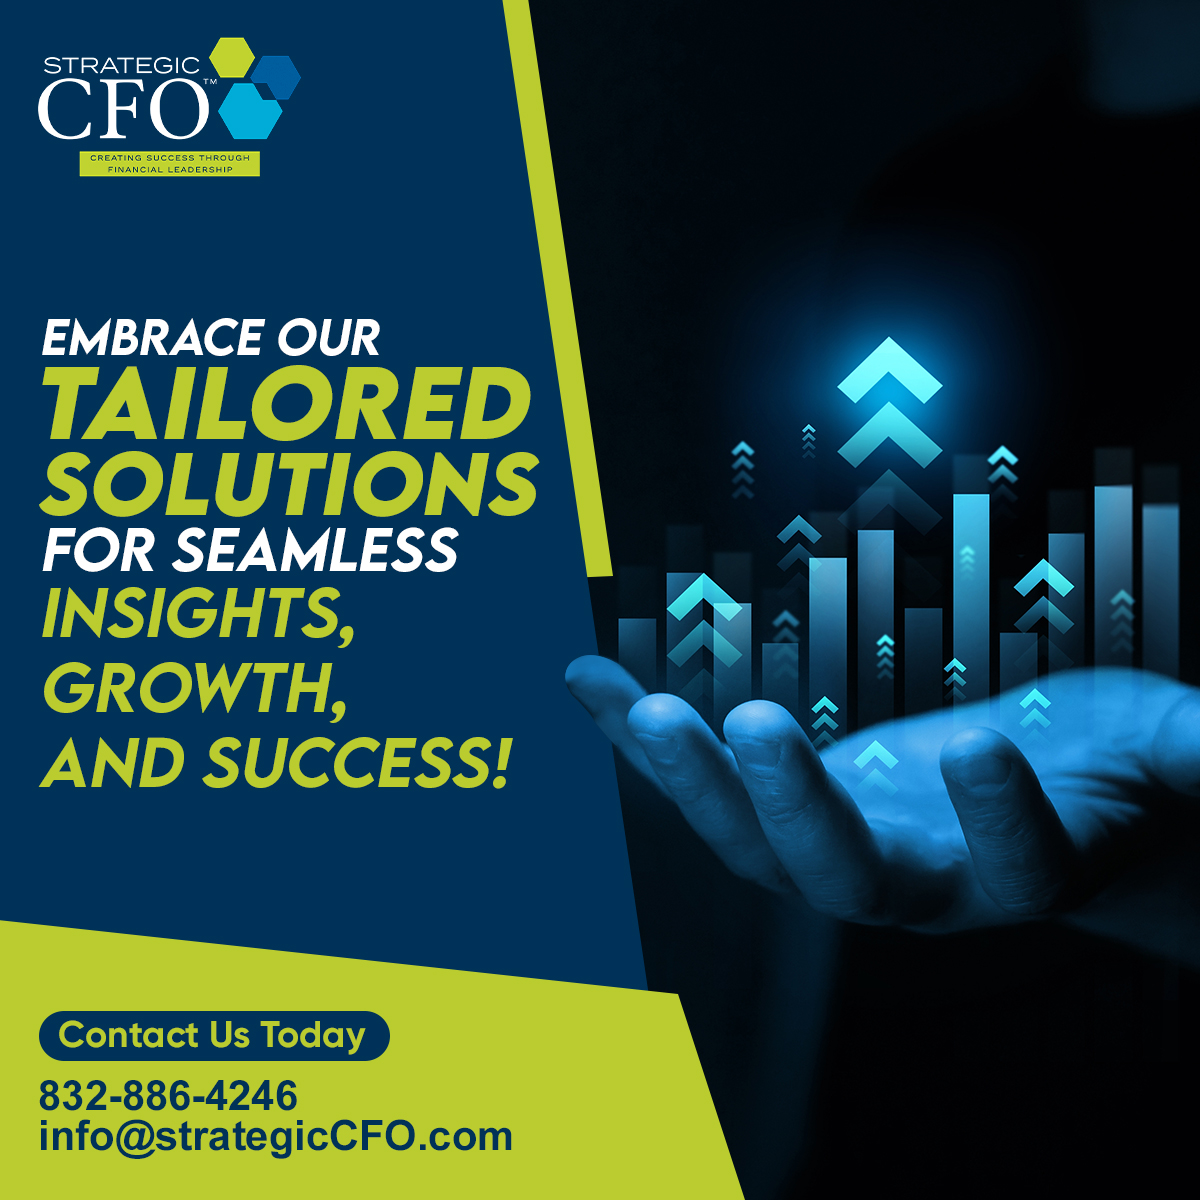 Our customized solutions go beyond numbers. Elevate your operations, empower decision-making, and propel your entrepreneurial journey!

Contact Strategic CFO™ today.
832-886-4246 | info@strategicCFO.com

#financialanalysis #cloudaccounting